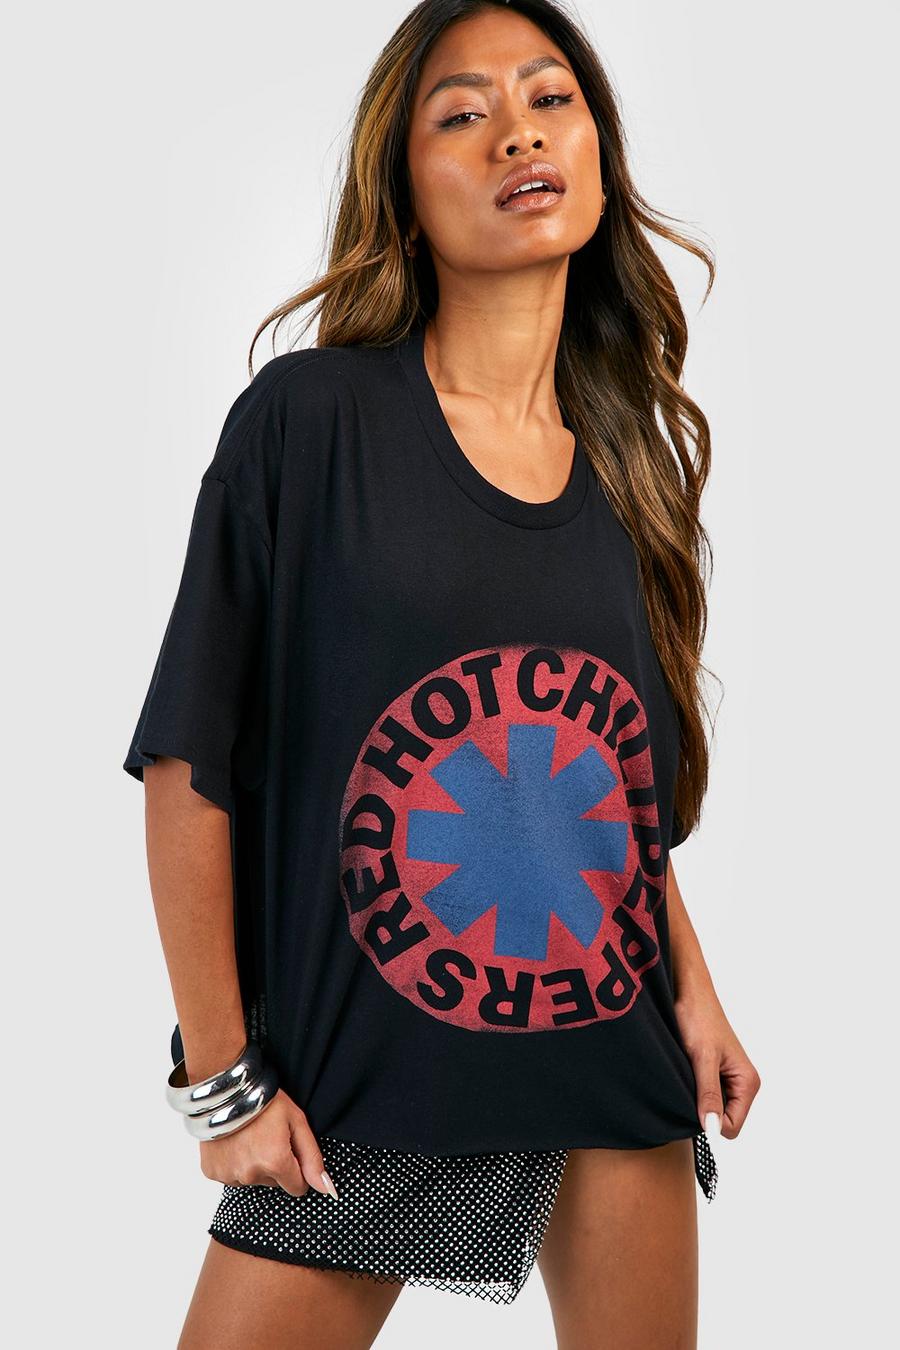 Red Hot Chili Peppers Cropped License Band T-Shirt